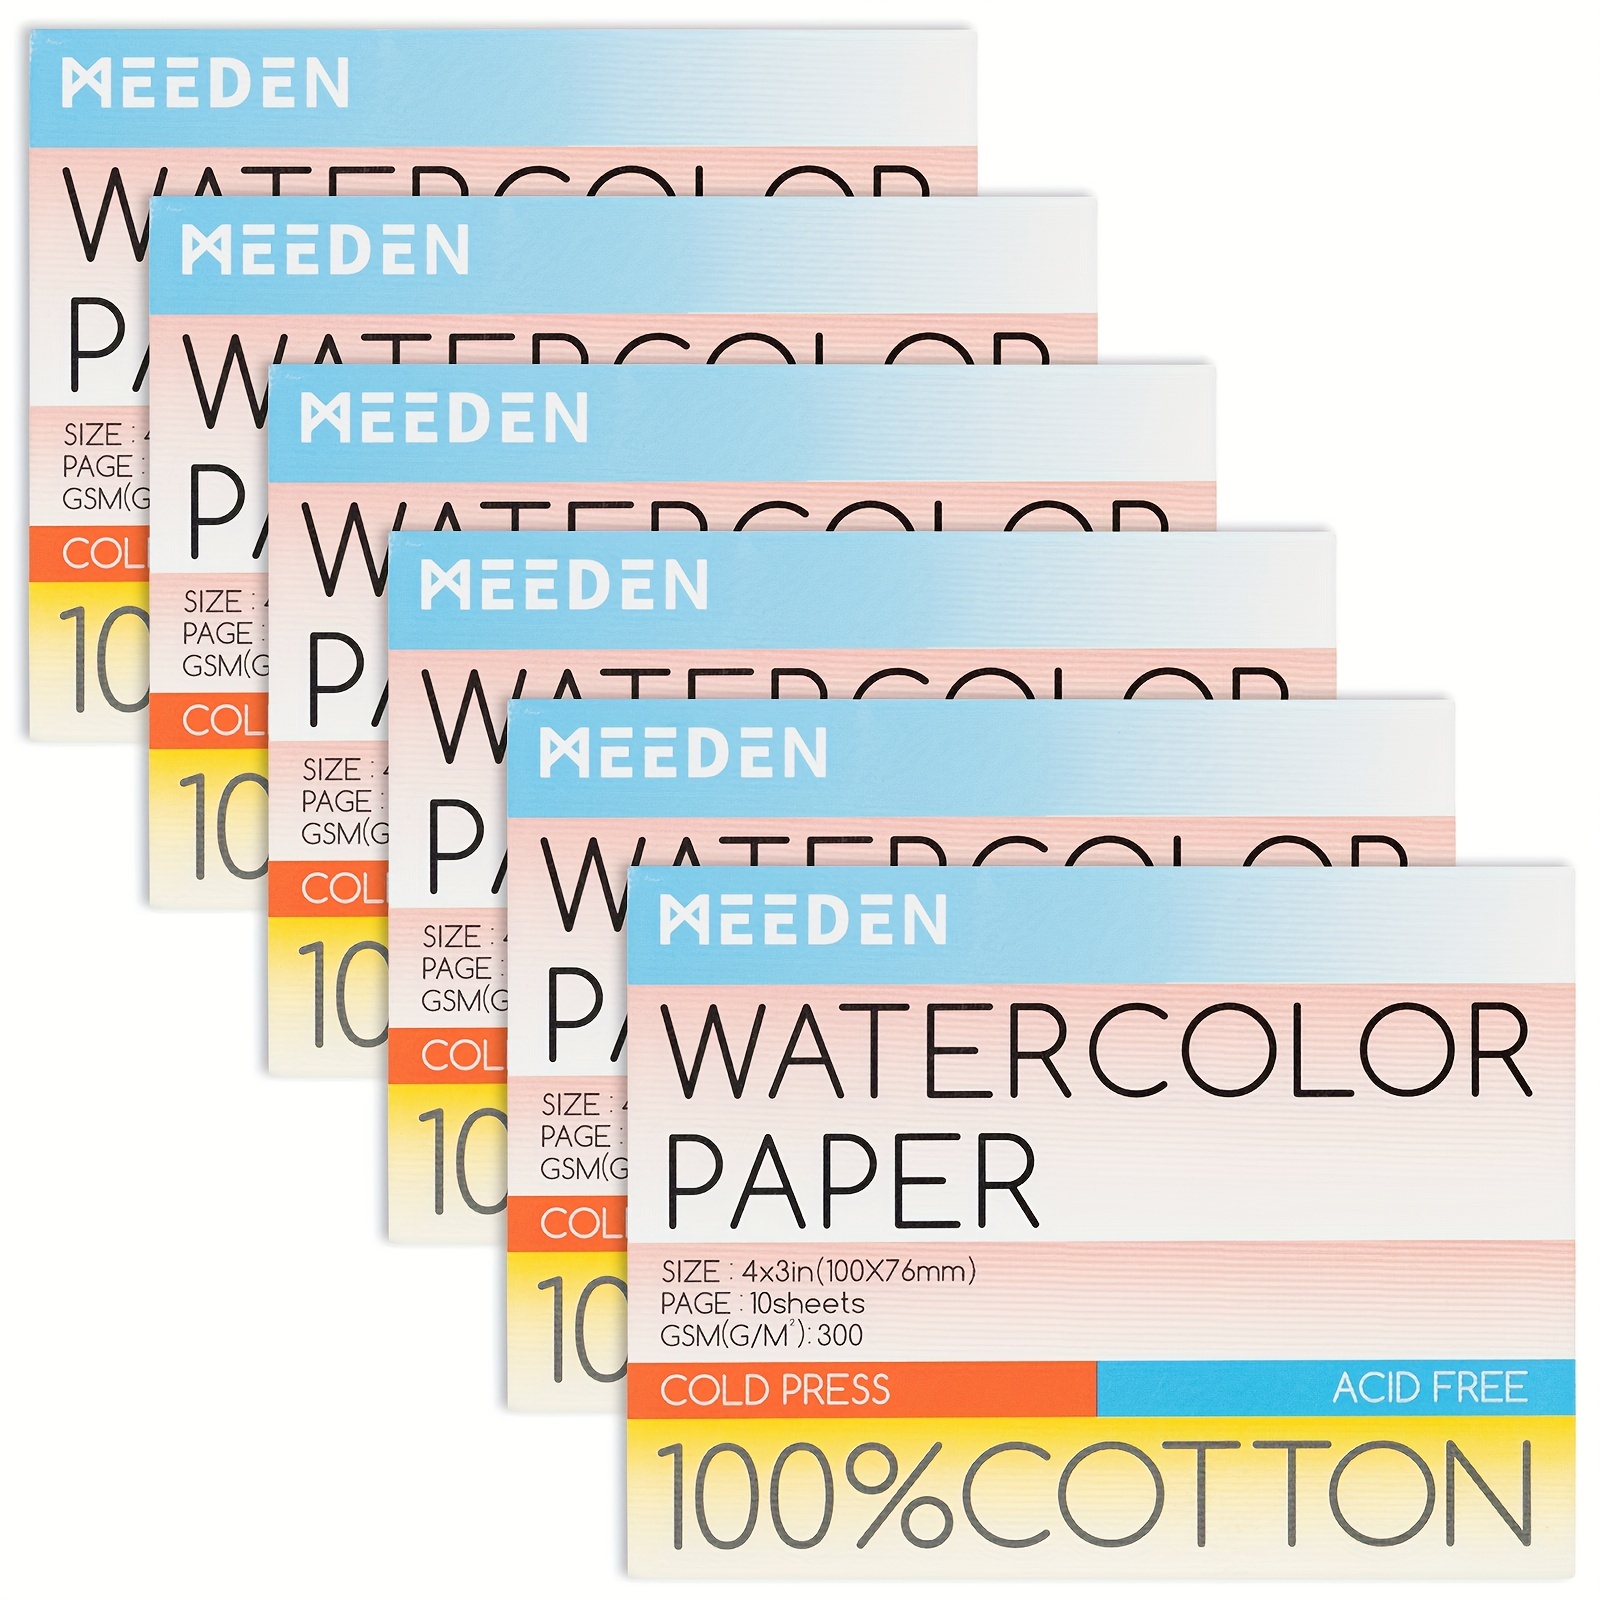 Inexpensive Cotton Watercolor Paper- Meeden watercolor block-also, what is  sizing? 